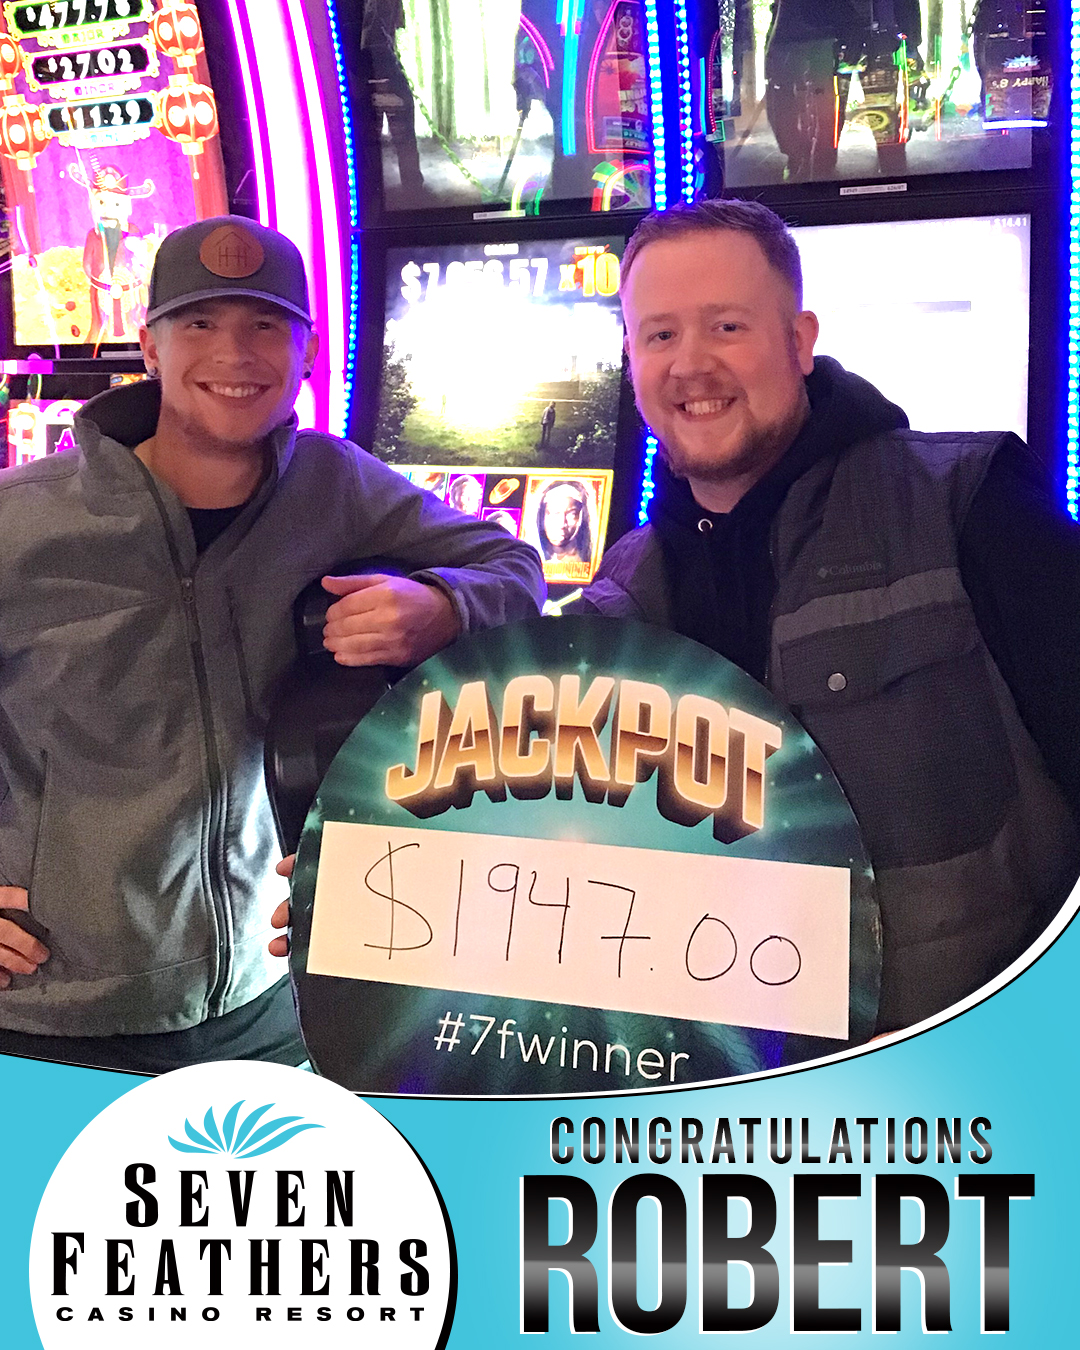 Robert Won A Big Jackpot At Seven Feathers Casino Resort In Canyonville Oregon